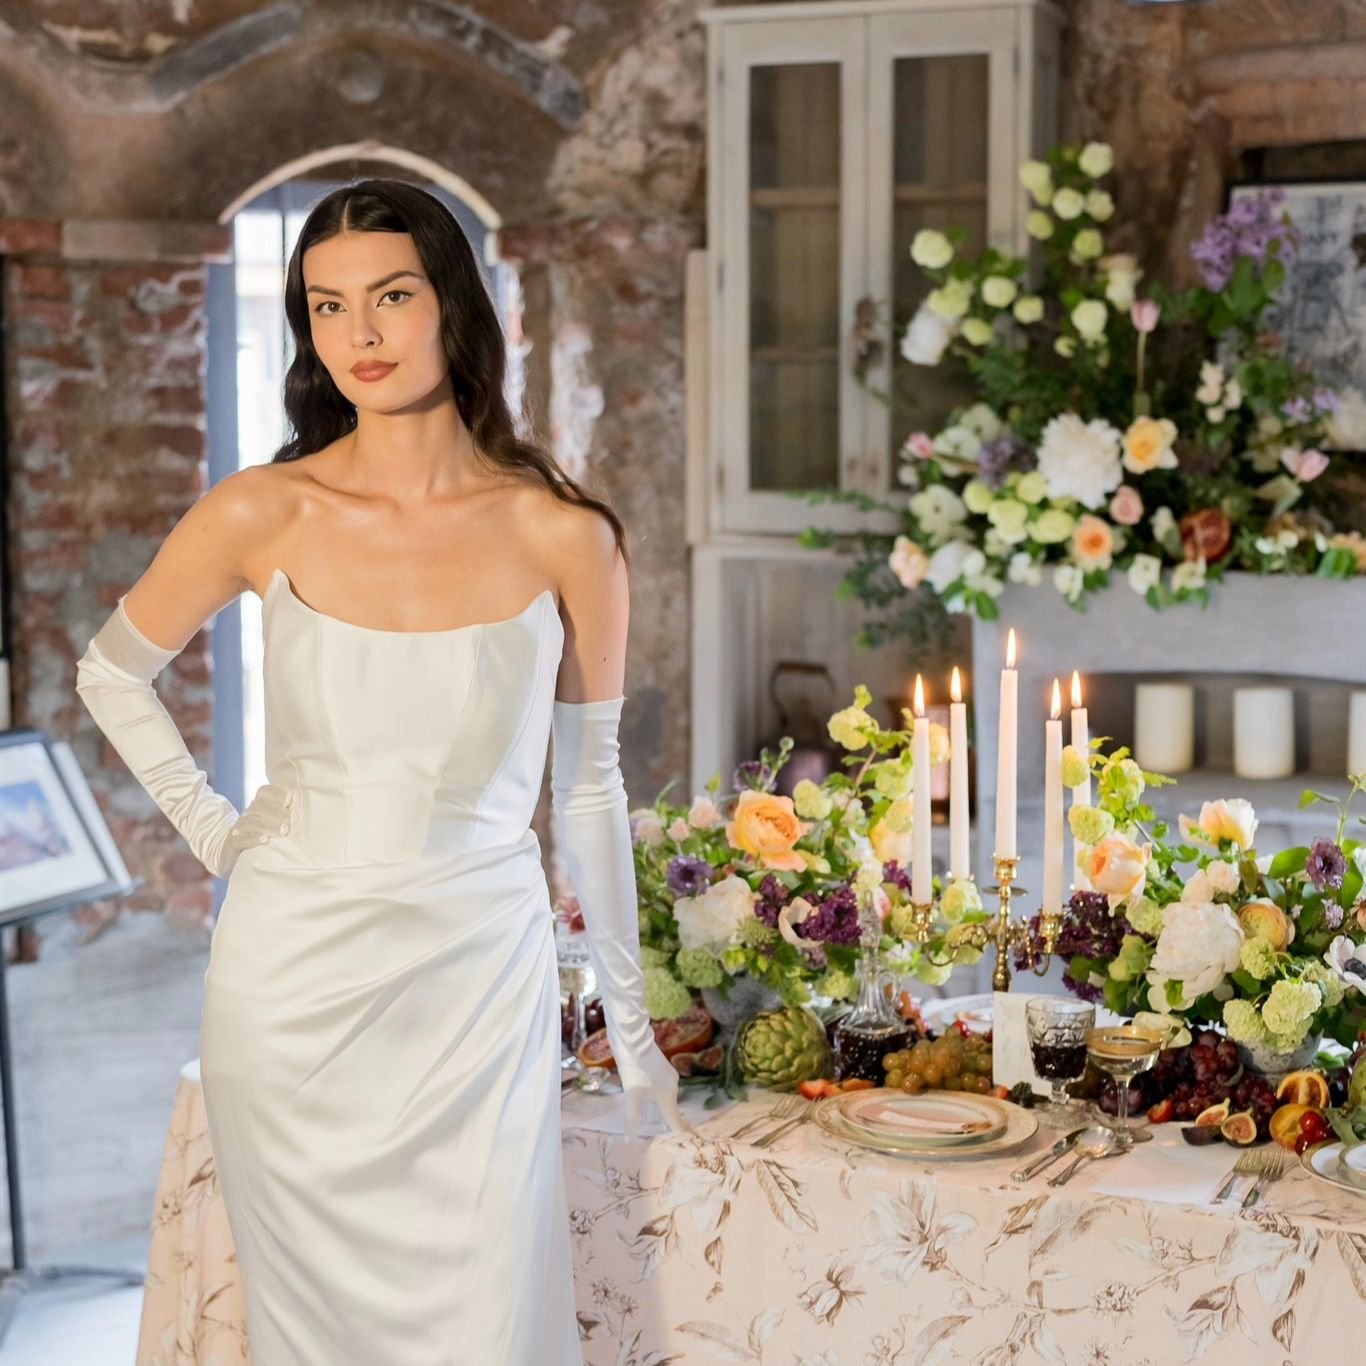 Planning, Event and Floral Design @simplicityinmind.florals

Planning &amp; Event Design 

@marinapaigedesigns 

Beauty &amp; Talent

 @jguerrabeauty 

Venue @bannermanislandtrust

Stationery &amp; Embroidery 

@featherandfoxdesign

Bridal Gowns &amp